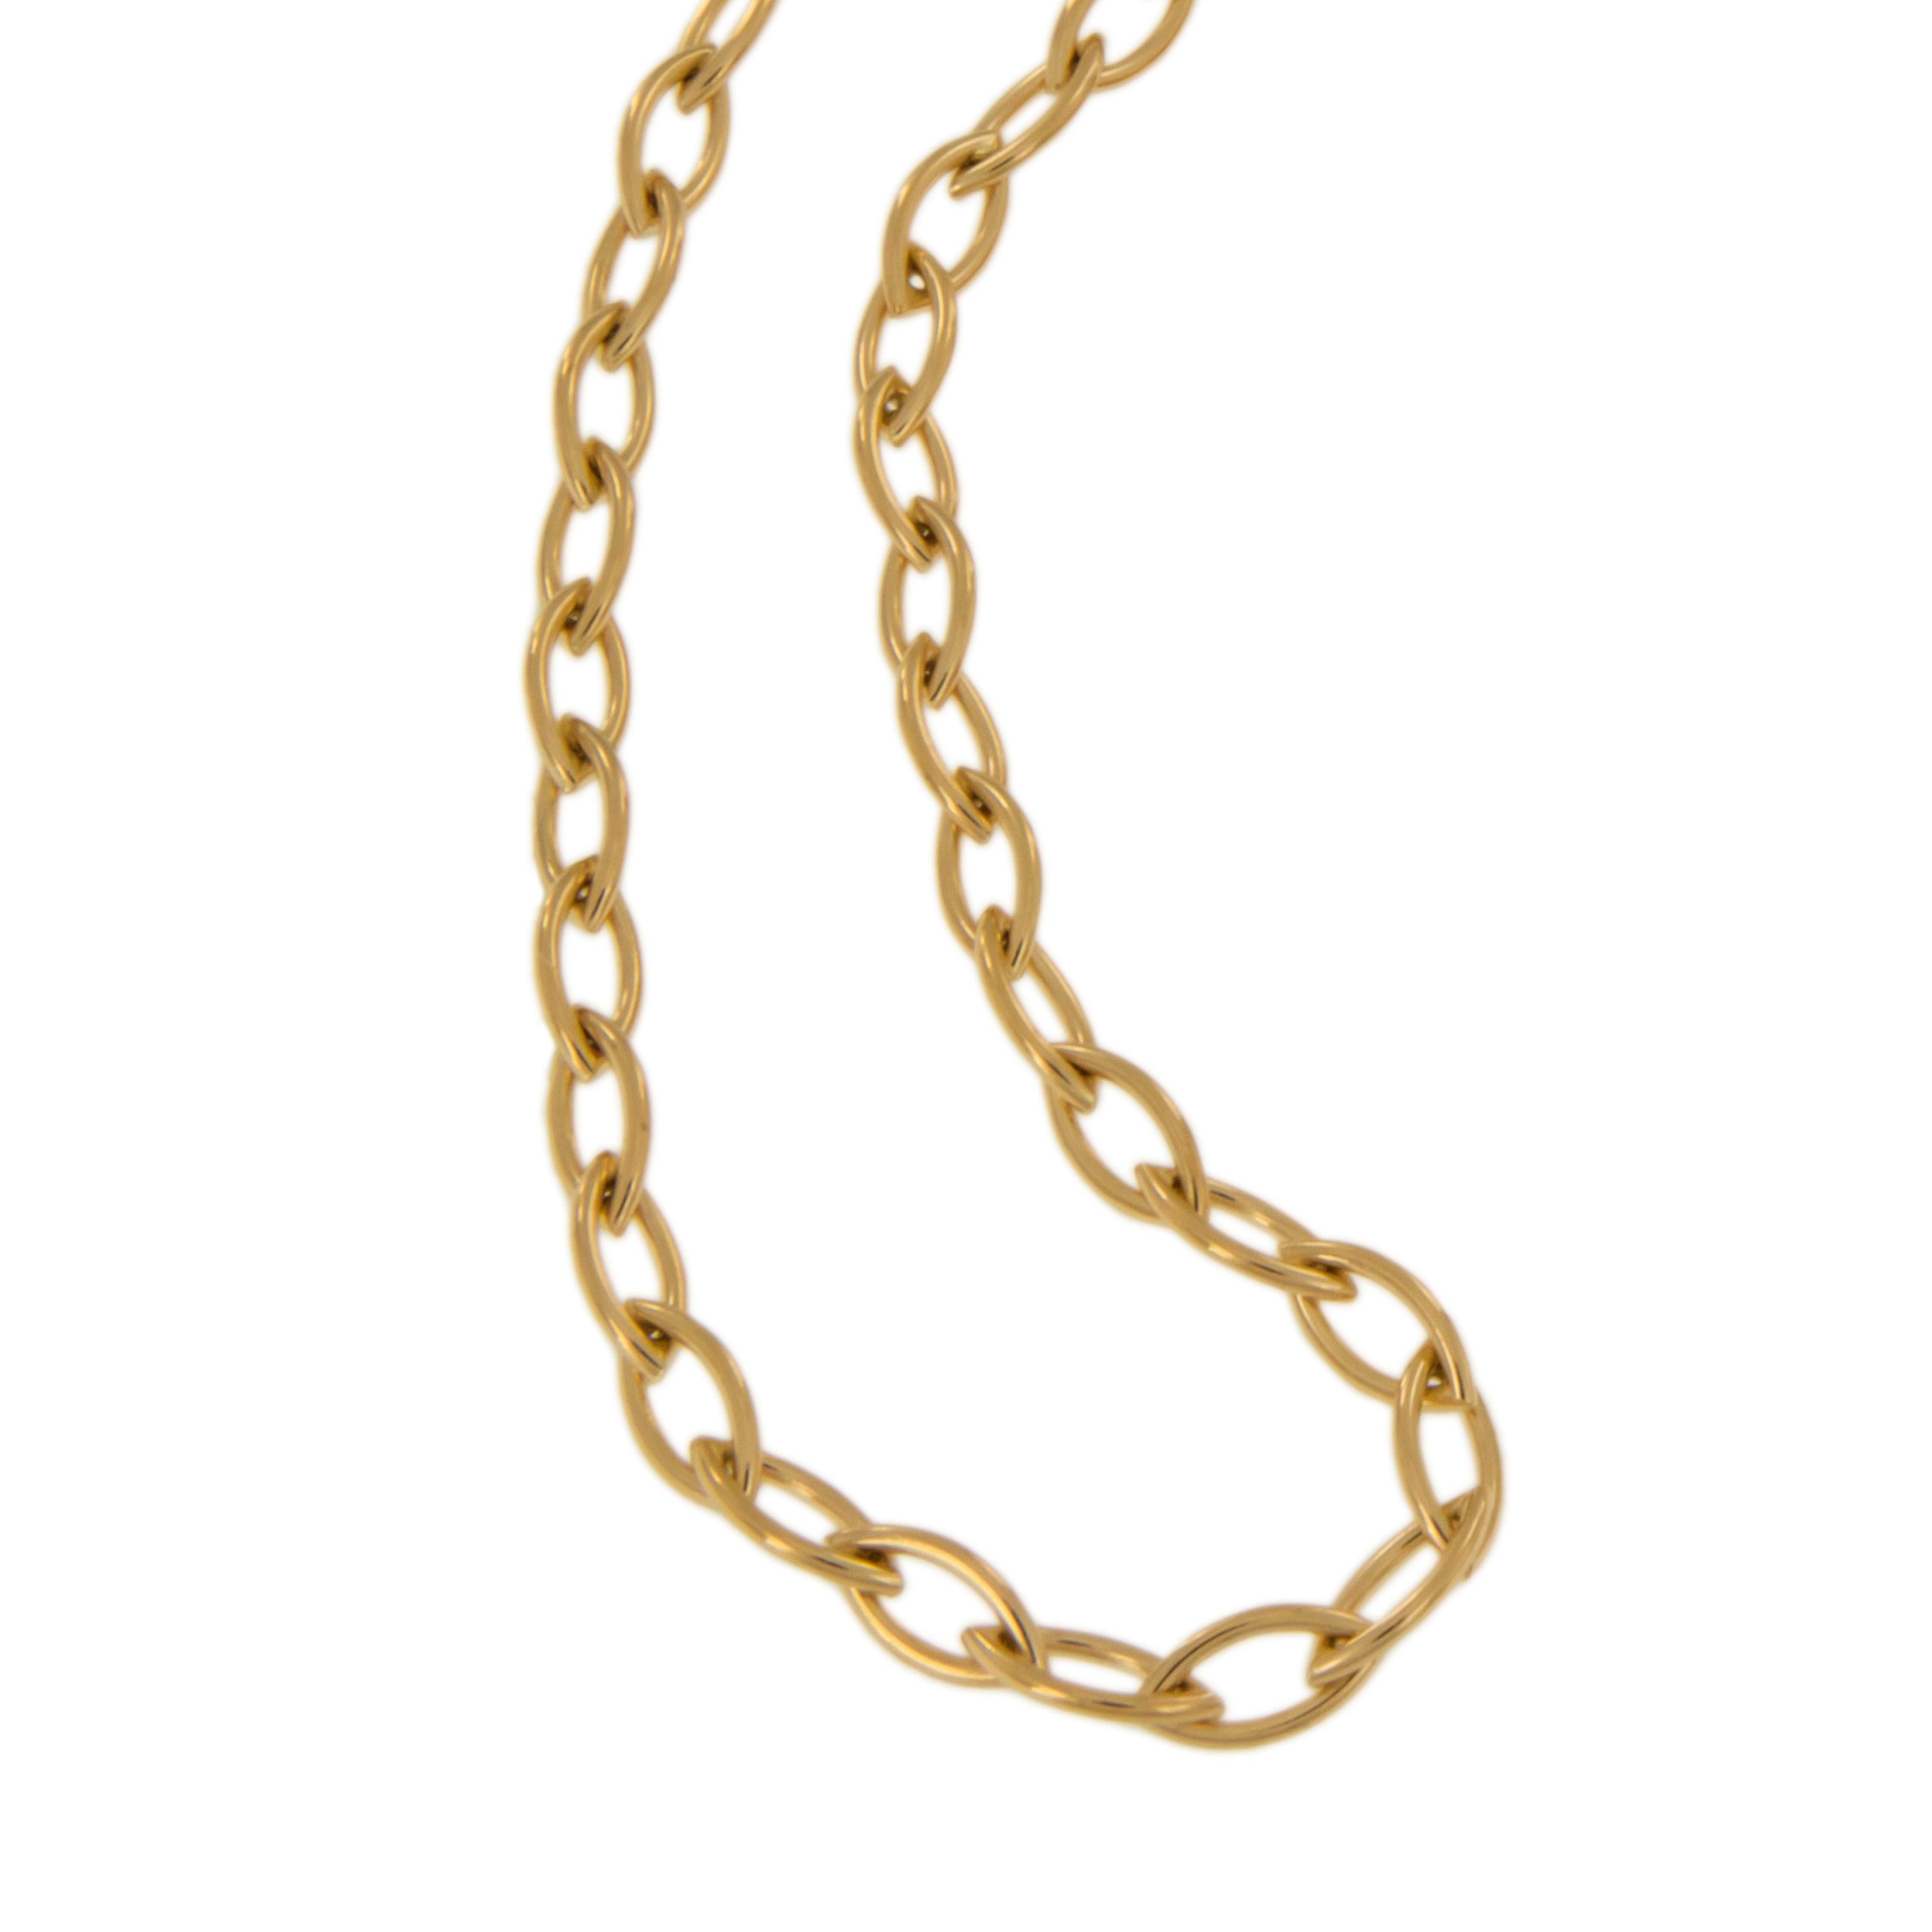 Beautiful handcrafted Italian 18k gold marquise shape link chain necklace with a secure lobster clasp looks perfect on it's own and also fabulous layered with other pieces! 3 necklaces available 24, 20 & 18 inches long but can be worn at any length,